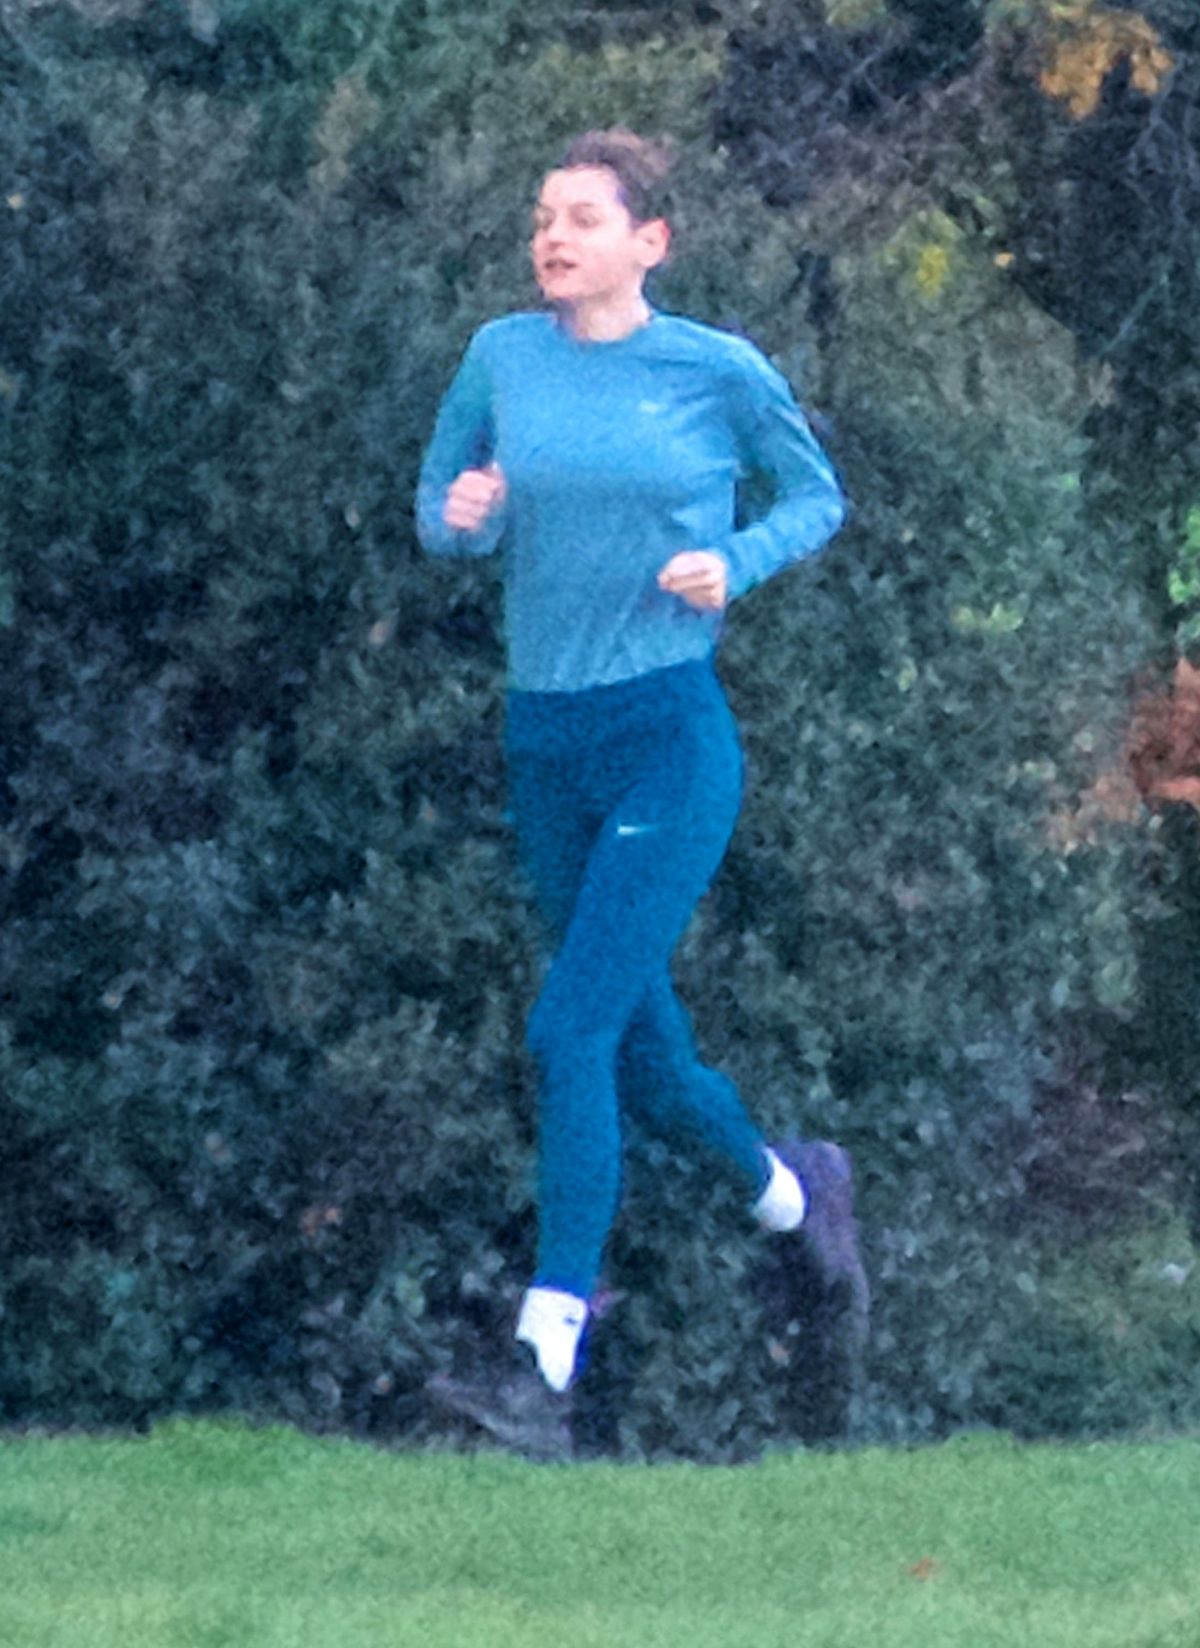 emma-corrin-out-jogging-at-a-park-in-london-11-13-2020-0.jpg